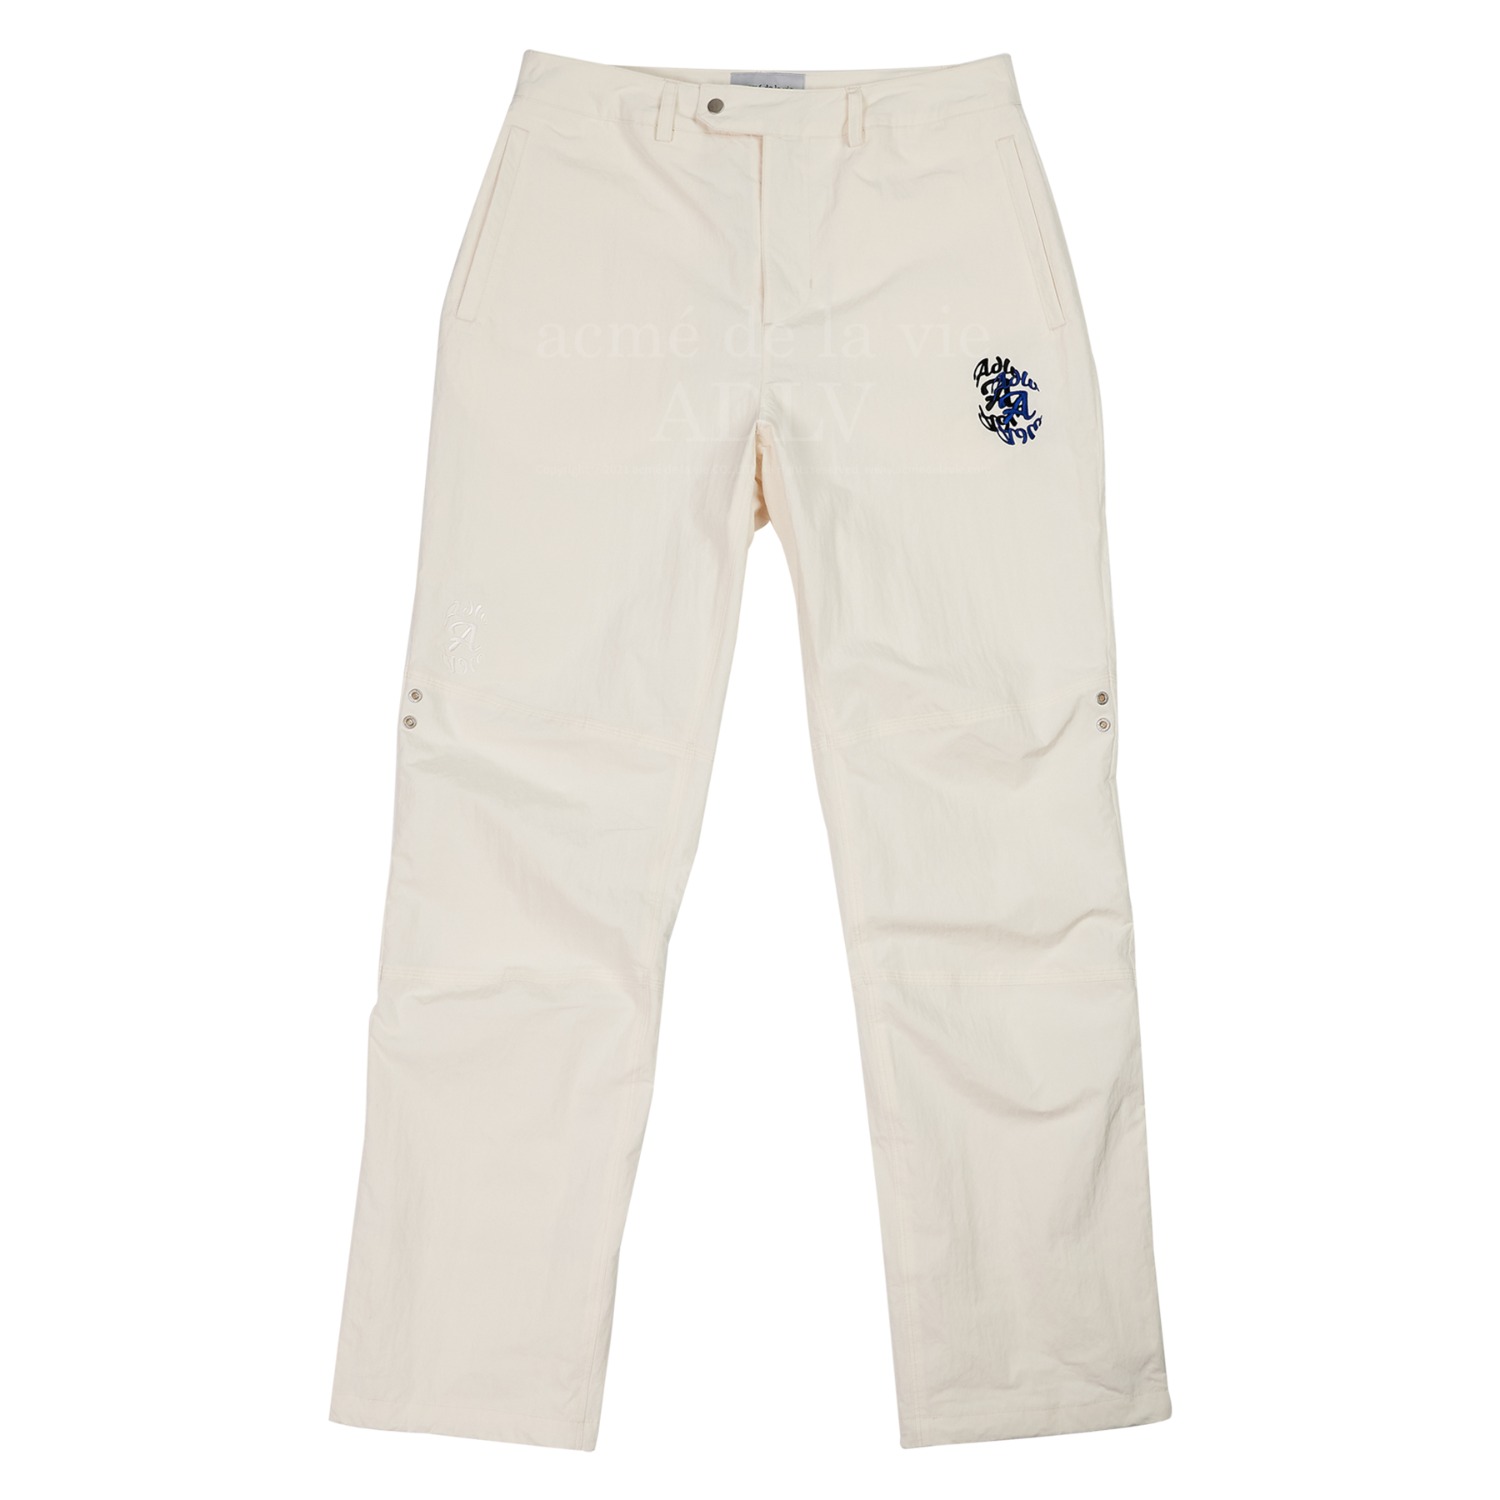 ADLV-[아크메드라비] MULTI EMBROIDERY WOVEN PANTS IVORY